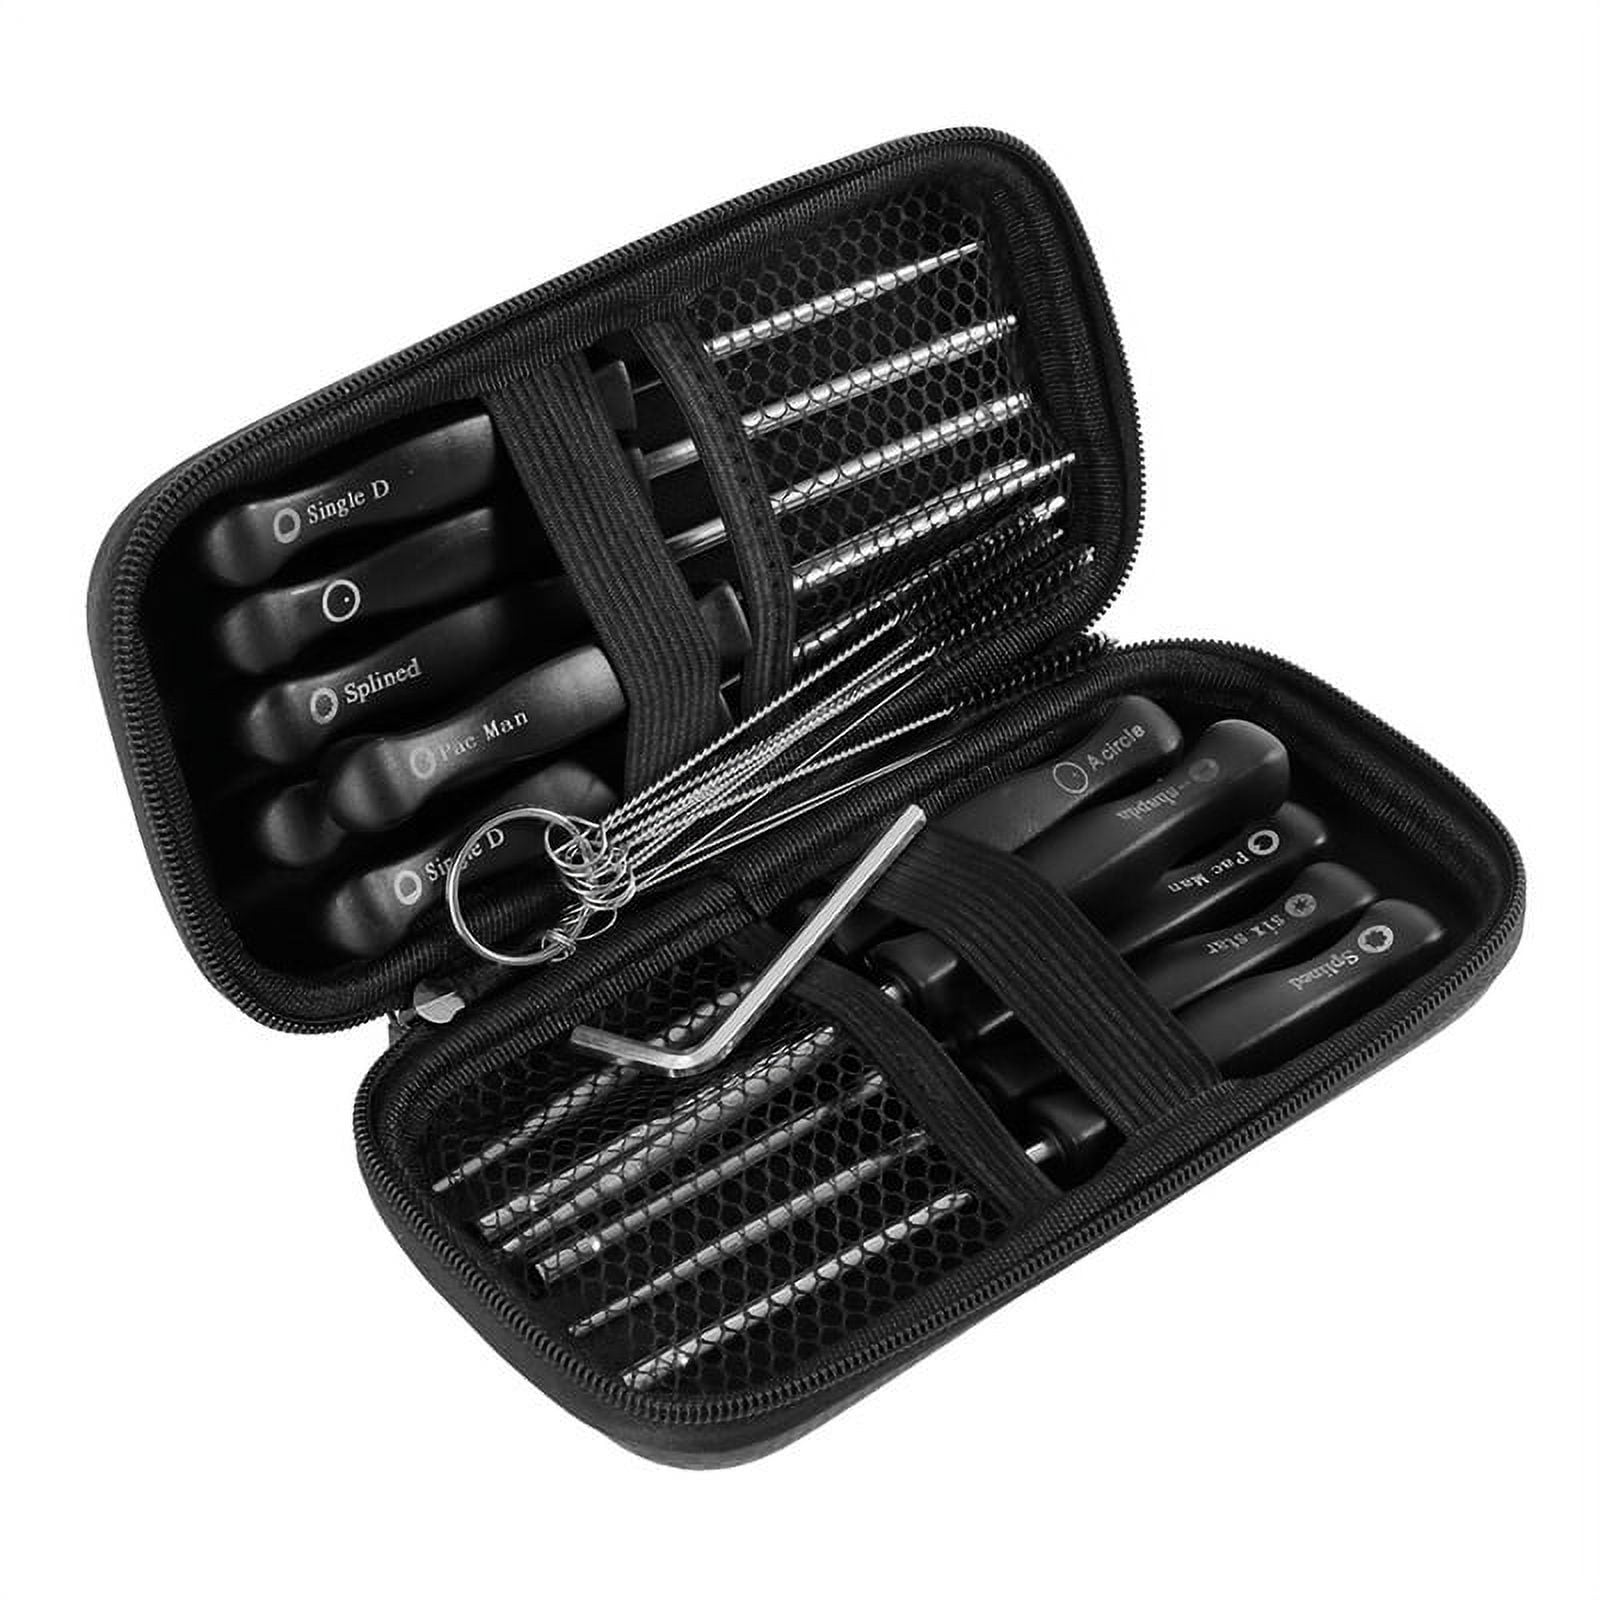 HHO Pack Of 8 Carburetor Adjustment Tool Wiha Screwdriver Set + Carburetor  Cleaning Kit + Carrying Case For Common 2 Cycle Small Engi Y200321 From  Shanye10, $16.1